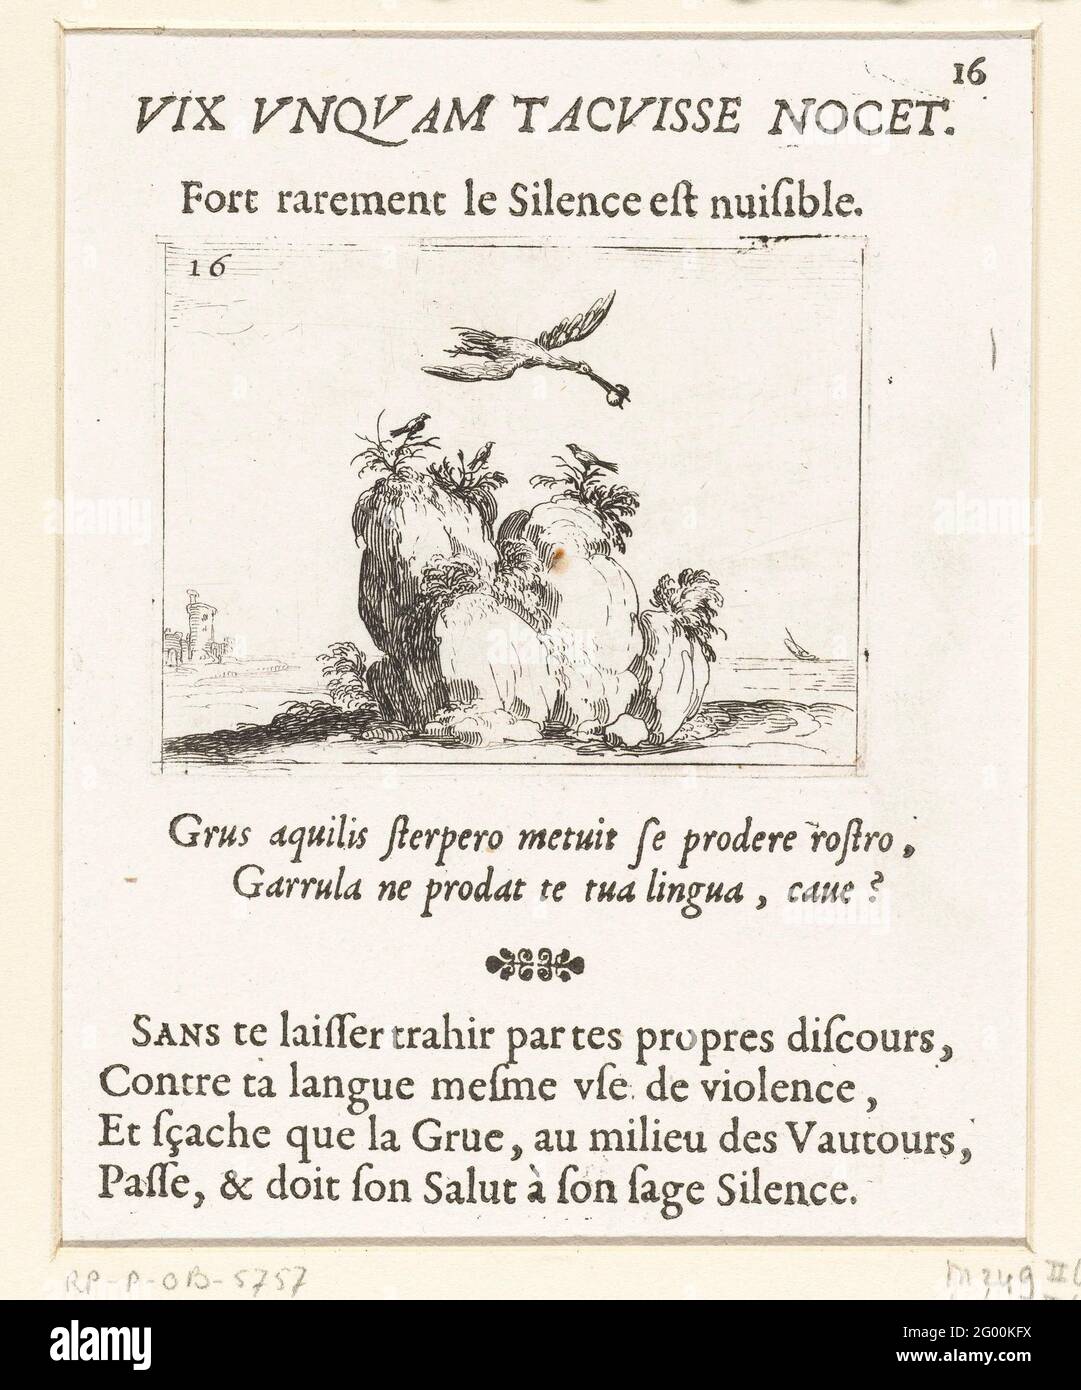 Crane with a stone in the beak; Vix Unquam Tacuisse Nocet / Fort R RRAYER LE SILENCE EST NUISIBLE; Monastery life in emblems. Presentation of a crane with a stone in the beak, flying over a rock on which three small birds are sitting. Above and below this print Latin and French texts in letterpress. This magazine is part of the emblem series 'monastic life in emblems'. In addition to an illustrated title page and 26 emblems, the second state of this series contains a title page and a blade with assignment, both in letterpress without image. Stock Photo